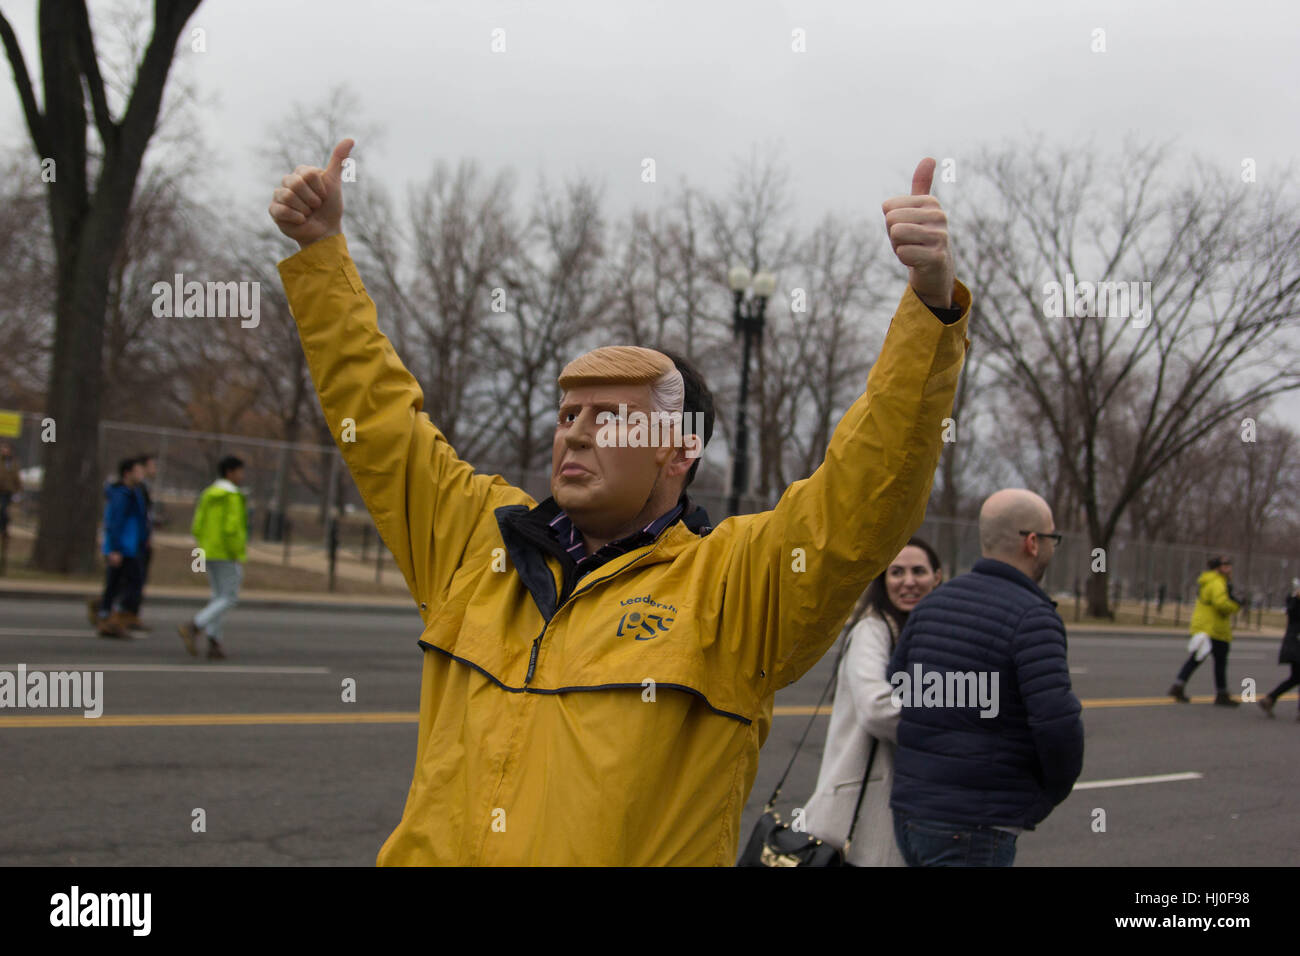 Washington DC, USA. 20th January, 2017. A man in a Donald Trump mask engages with protestors on the streets of Washington, DC, Friday, January 20, 2017. Credit: Michael Candelori/Alamy Live News Stock Photo